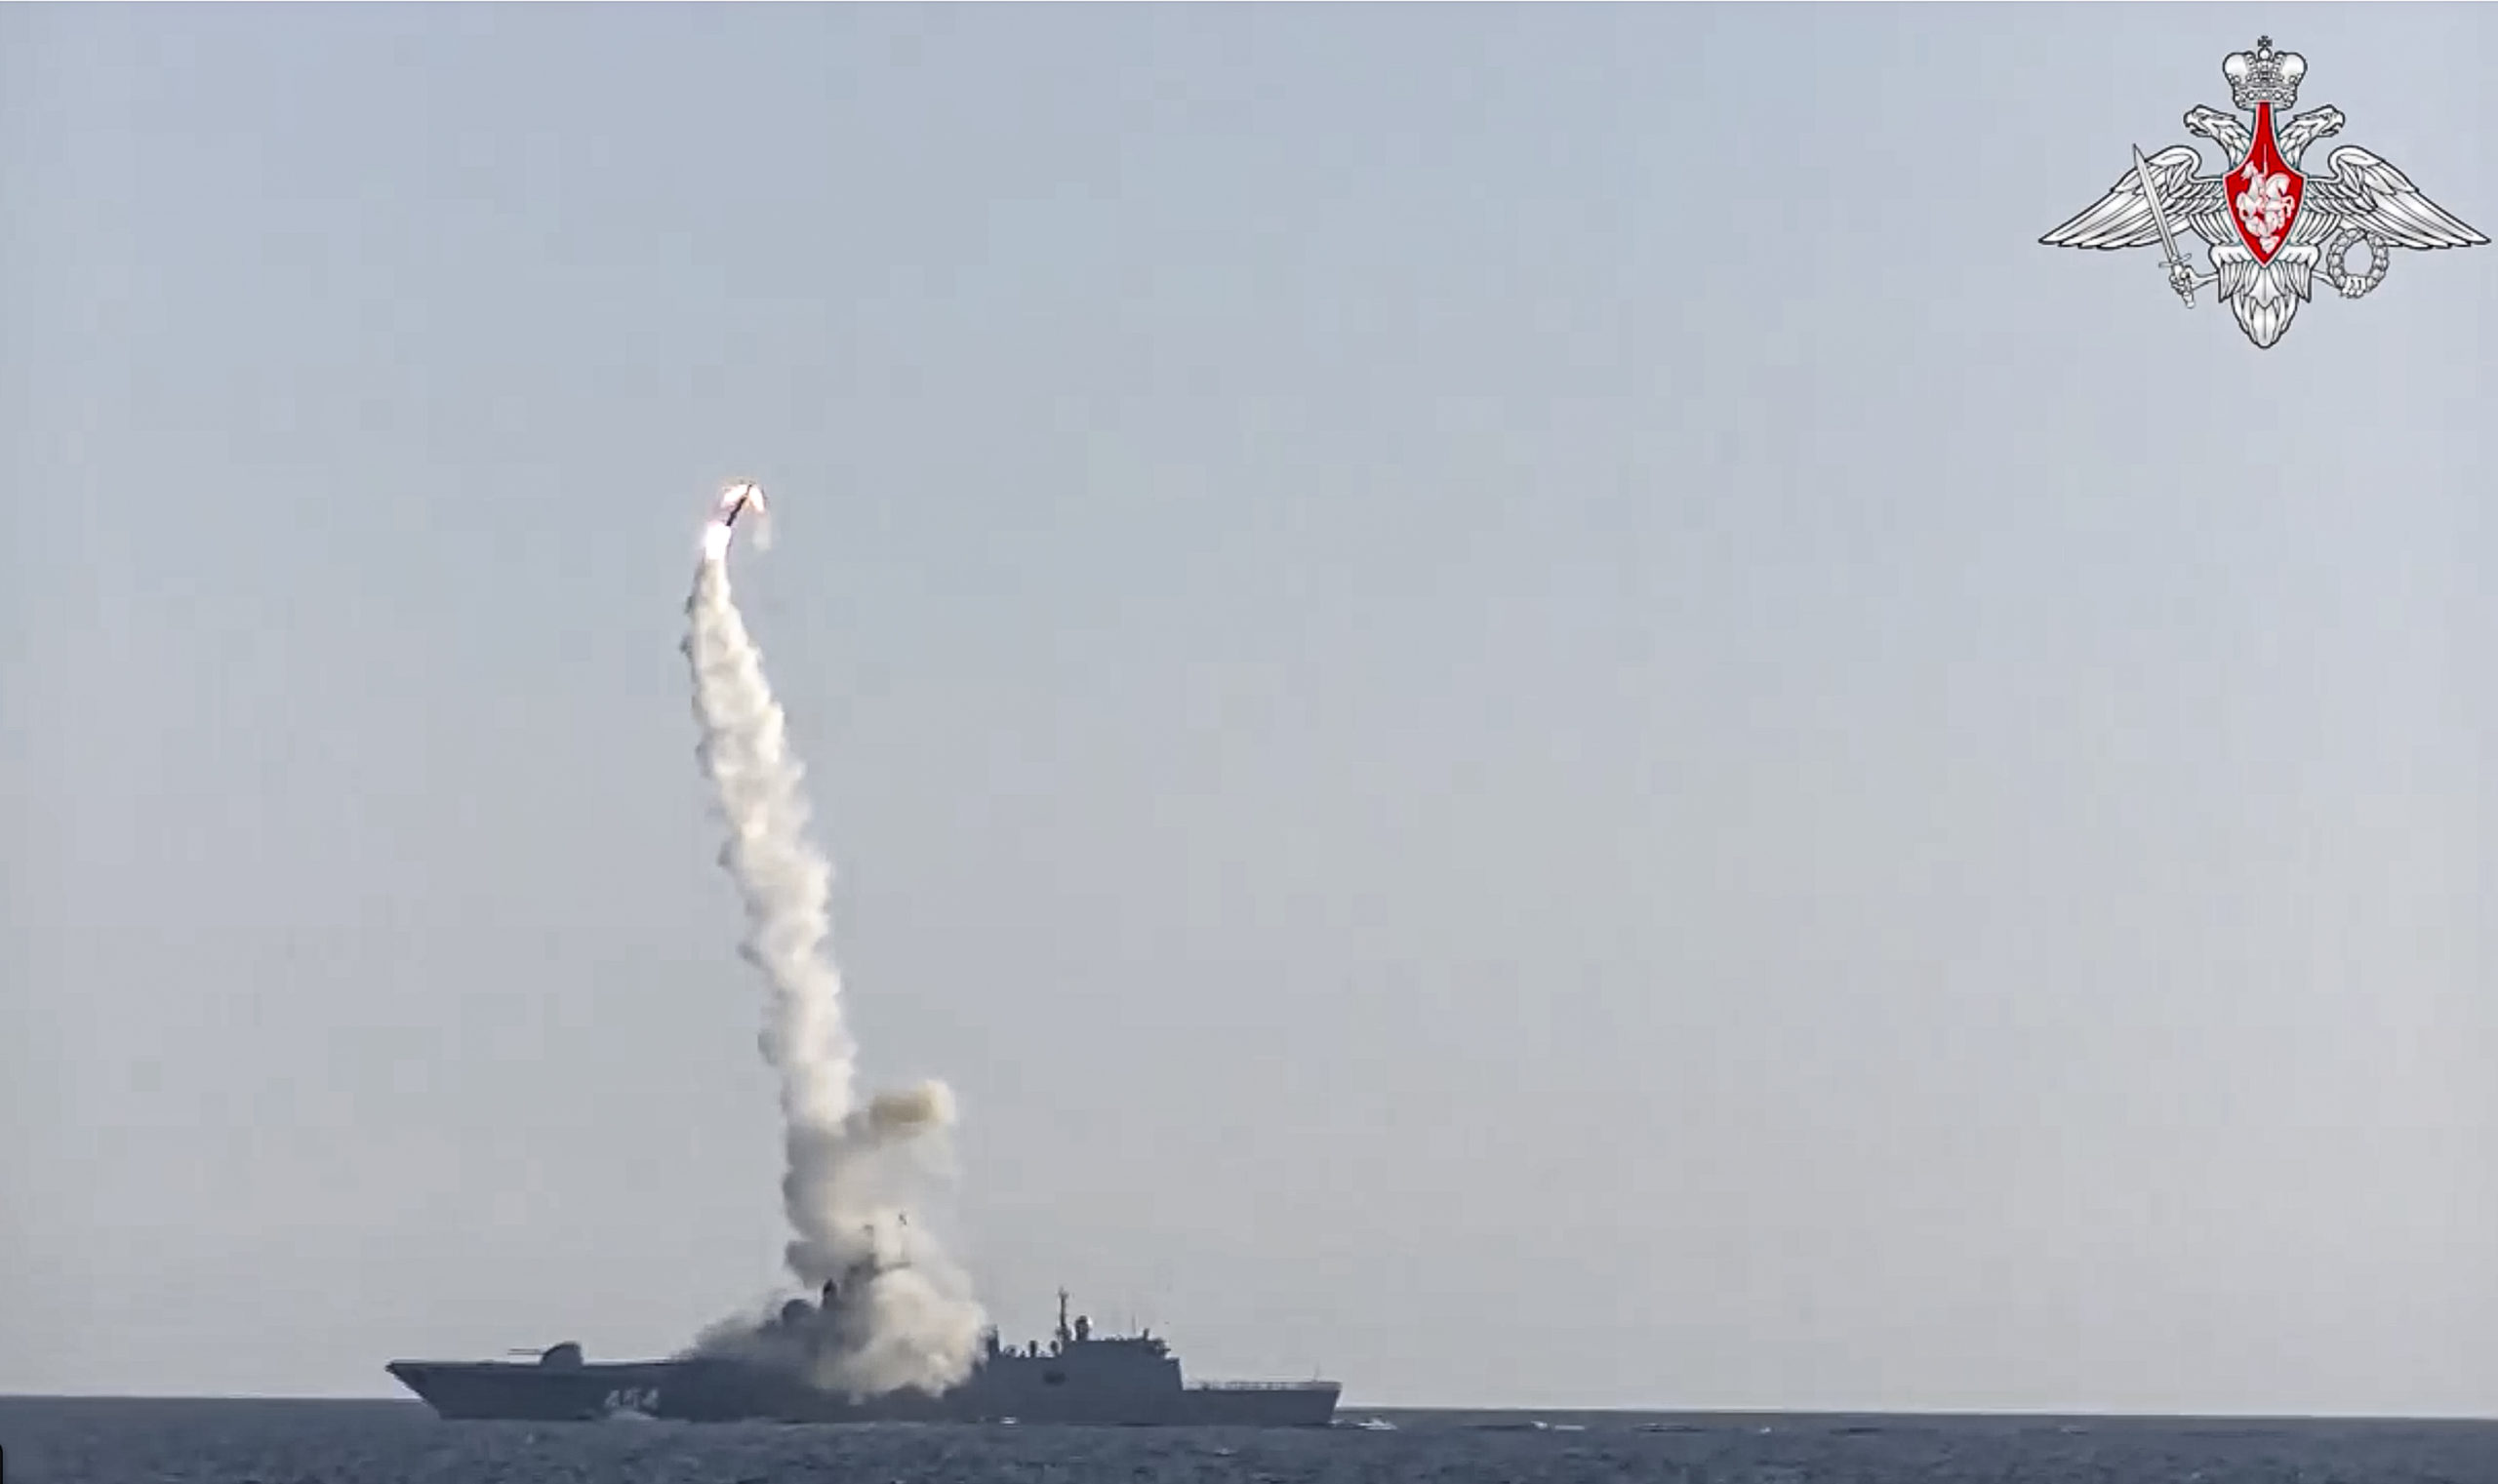 Russian Zircon hypersonic cruise missile being launched by the frigate Admiral Gorshkov of the Russian navy from the White Sea, in the north of Russia.